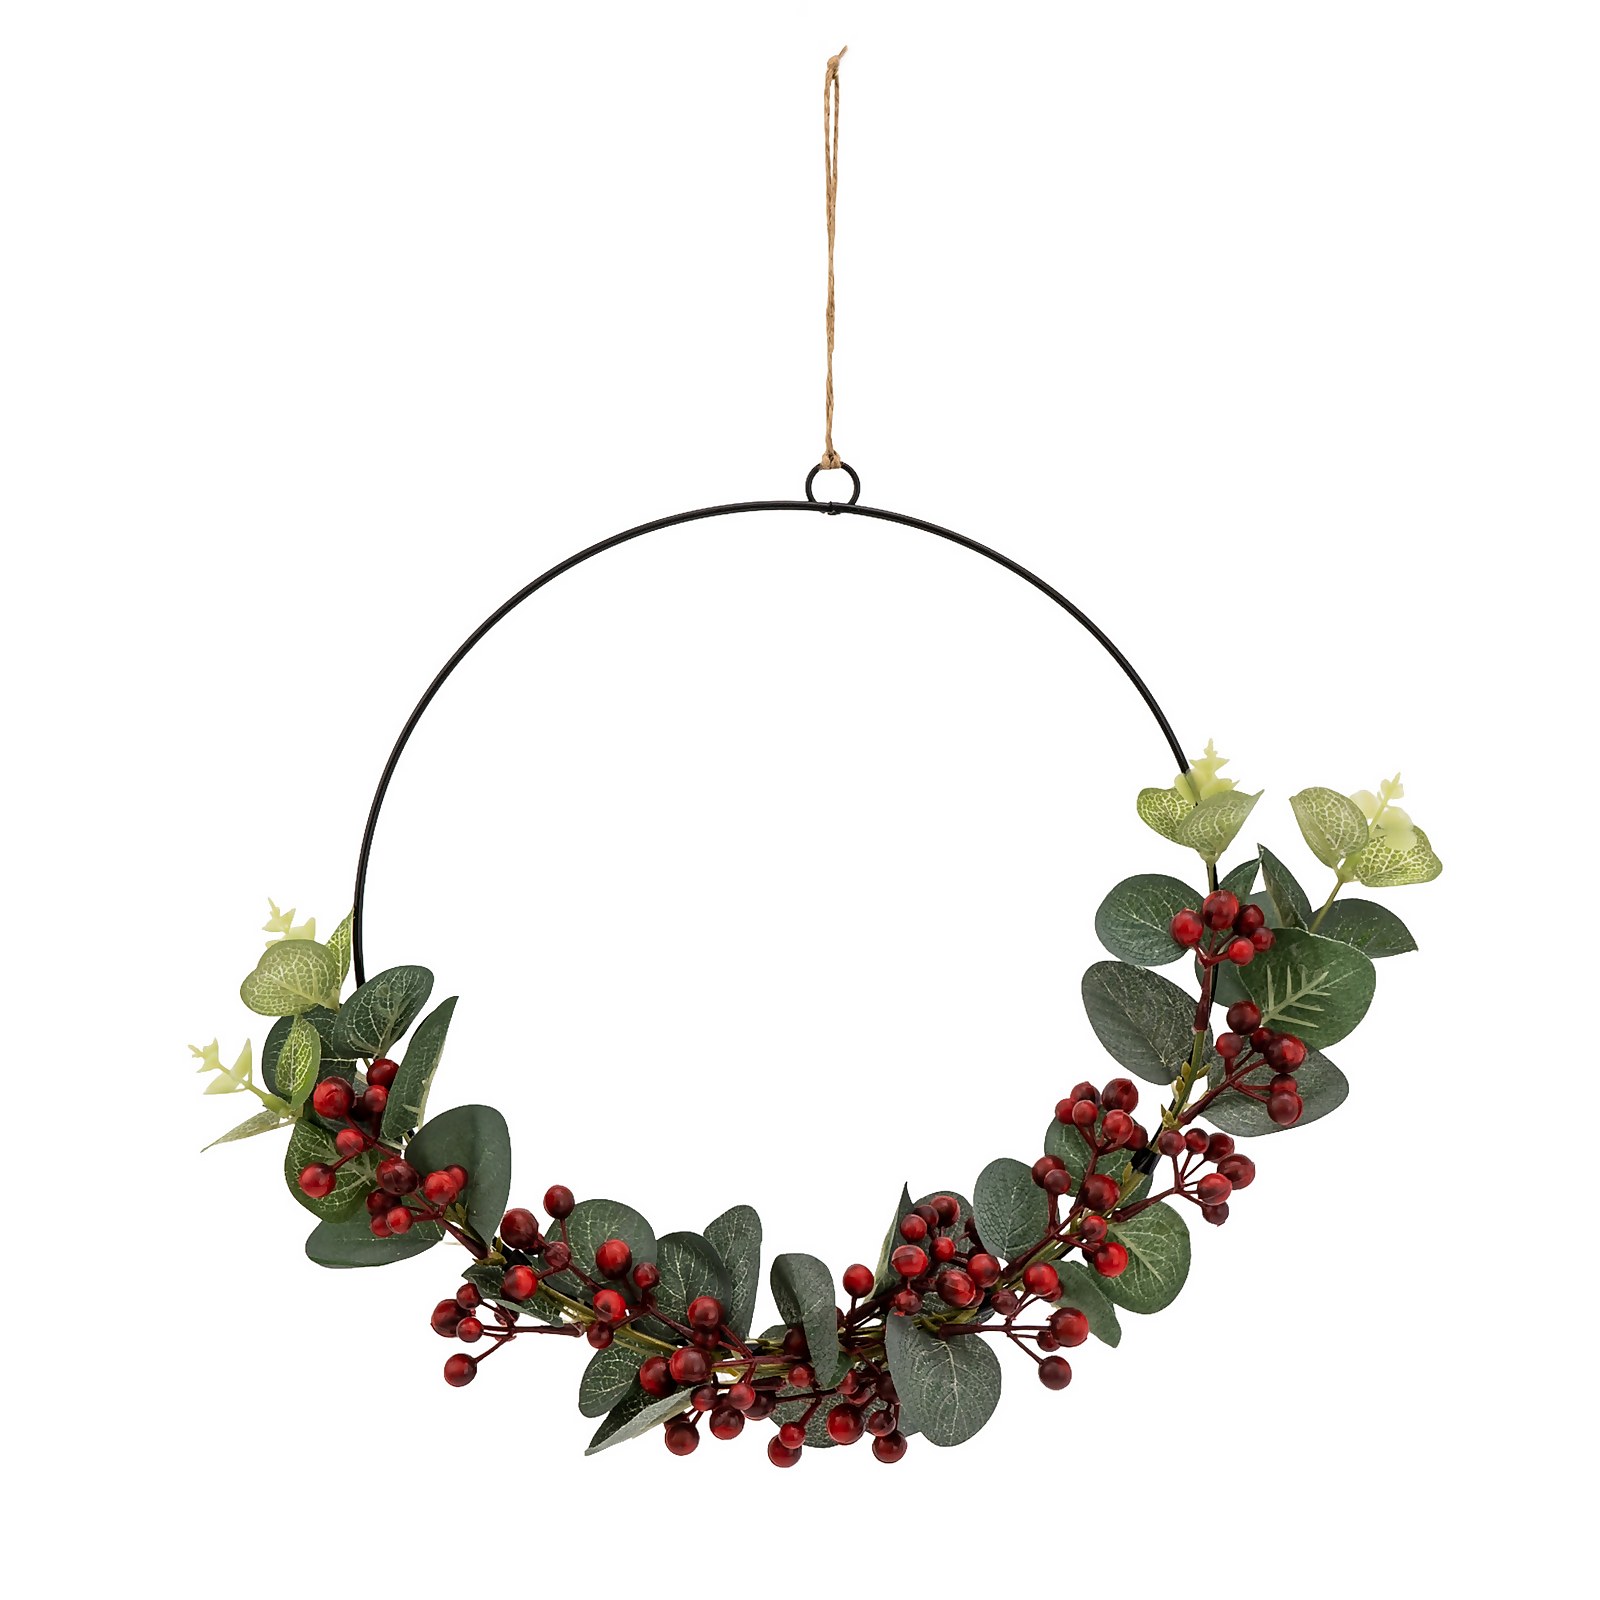 Photo of Hanging Wreath With Foliage And Berries